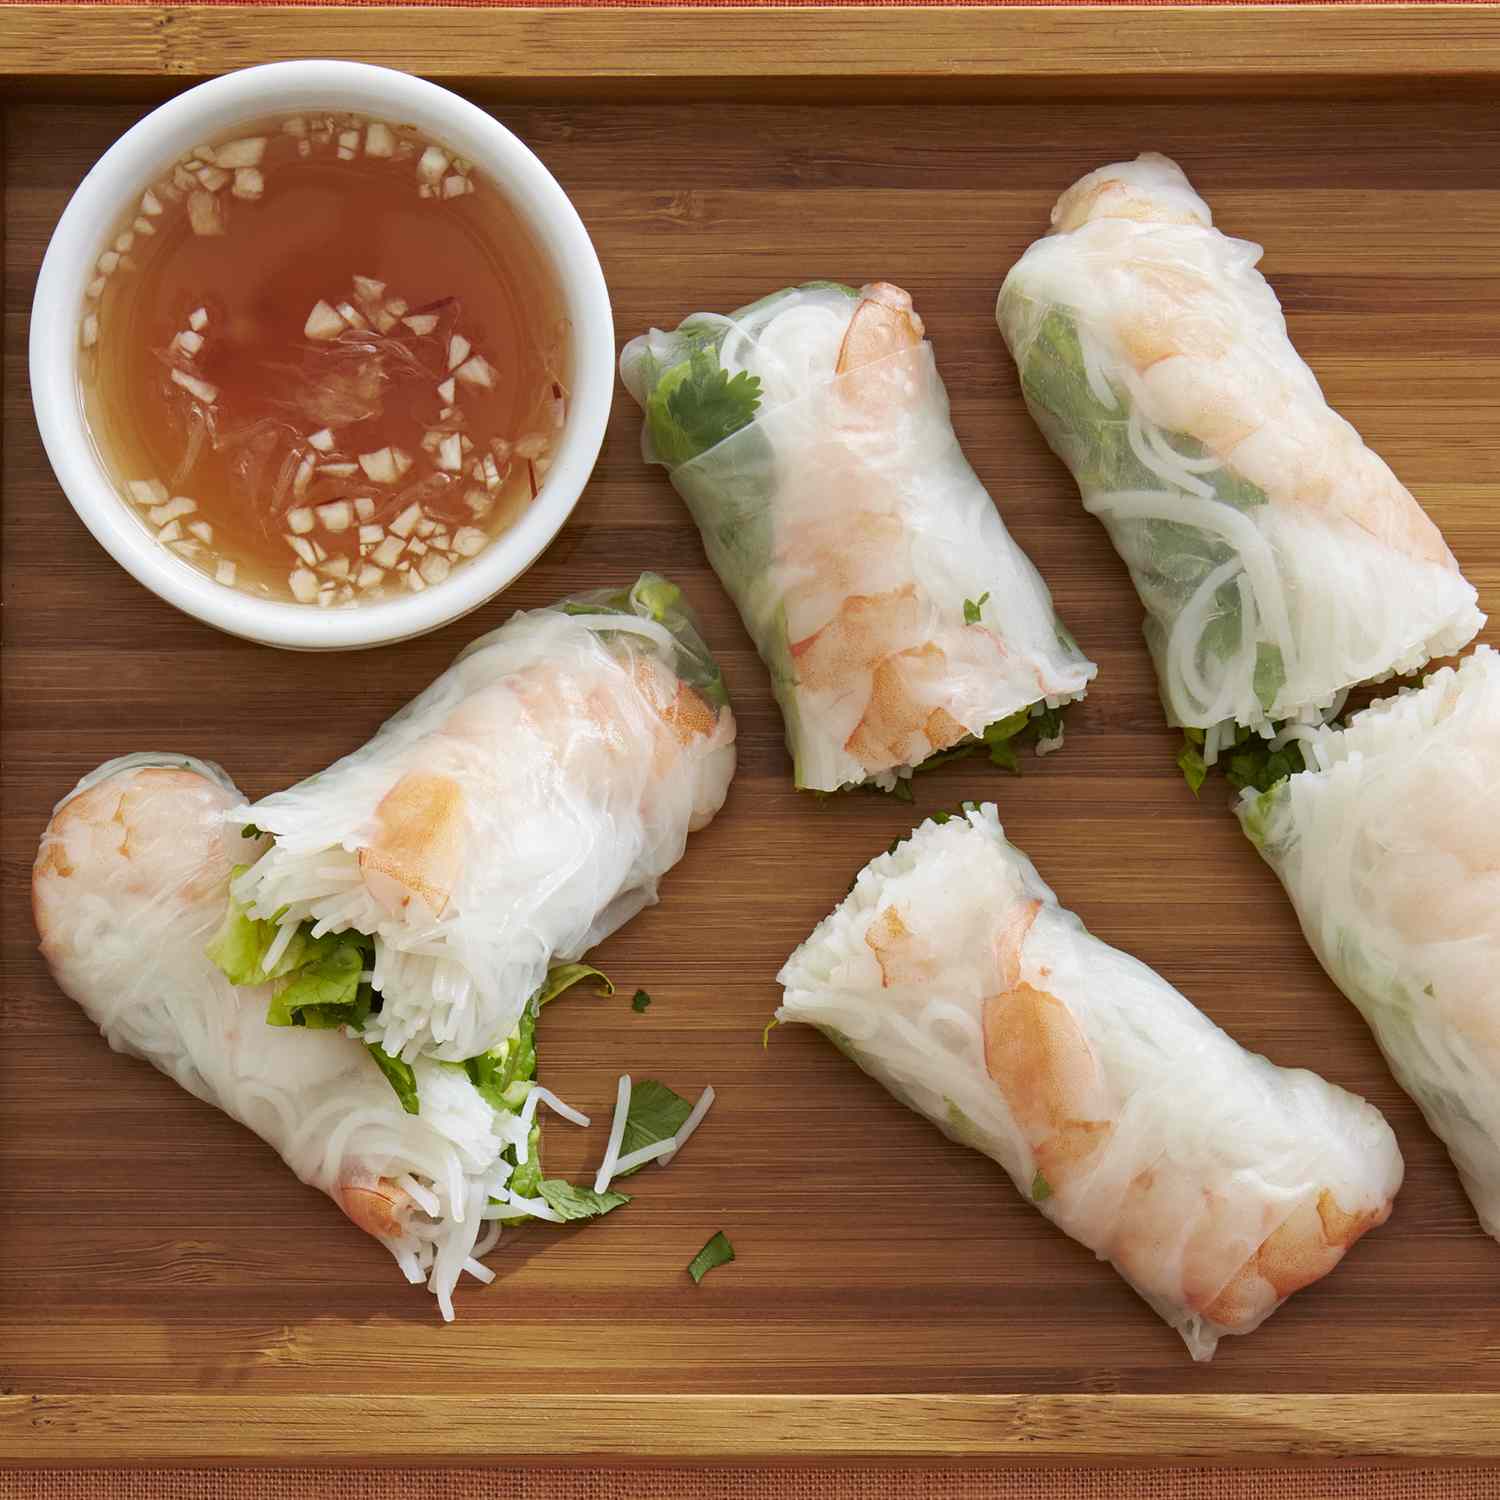 An overhead view of 3 Vietnamese Spring rolls, cut in half, on a bamboo tray. Served with a chili sauce